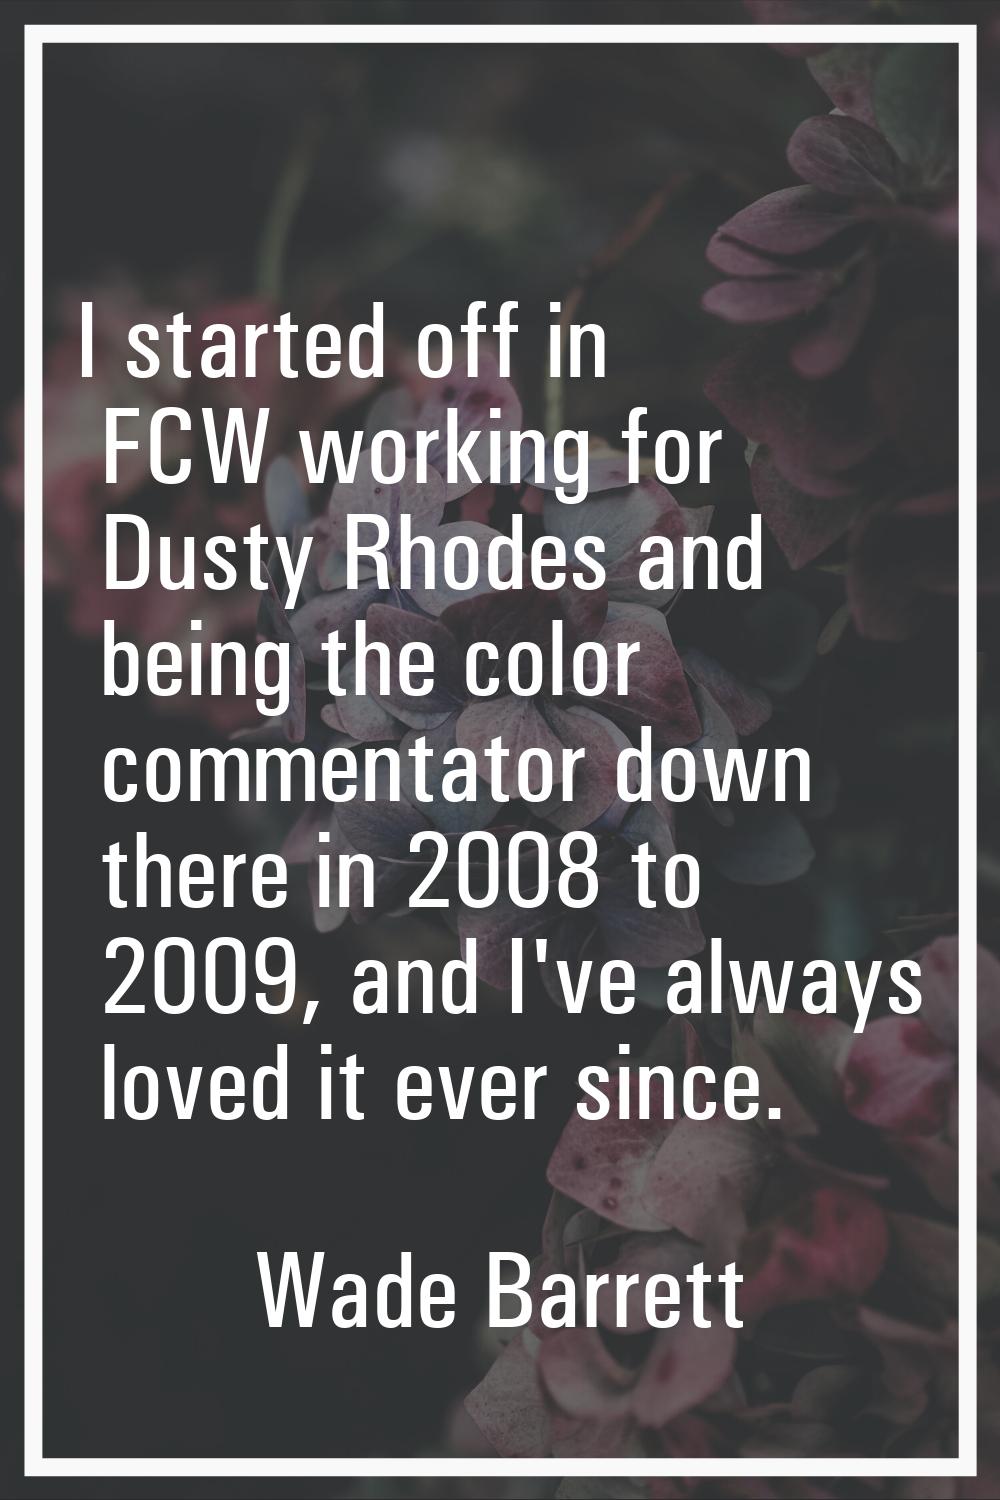 I started off in FCW working for Dusty Rhodes and being the color commentator down there in 2008 to